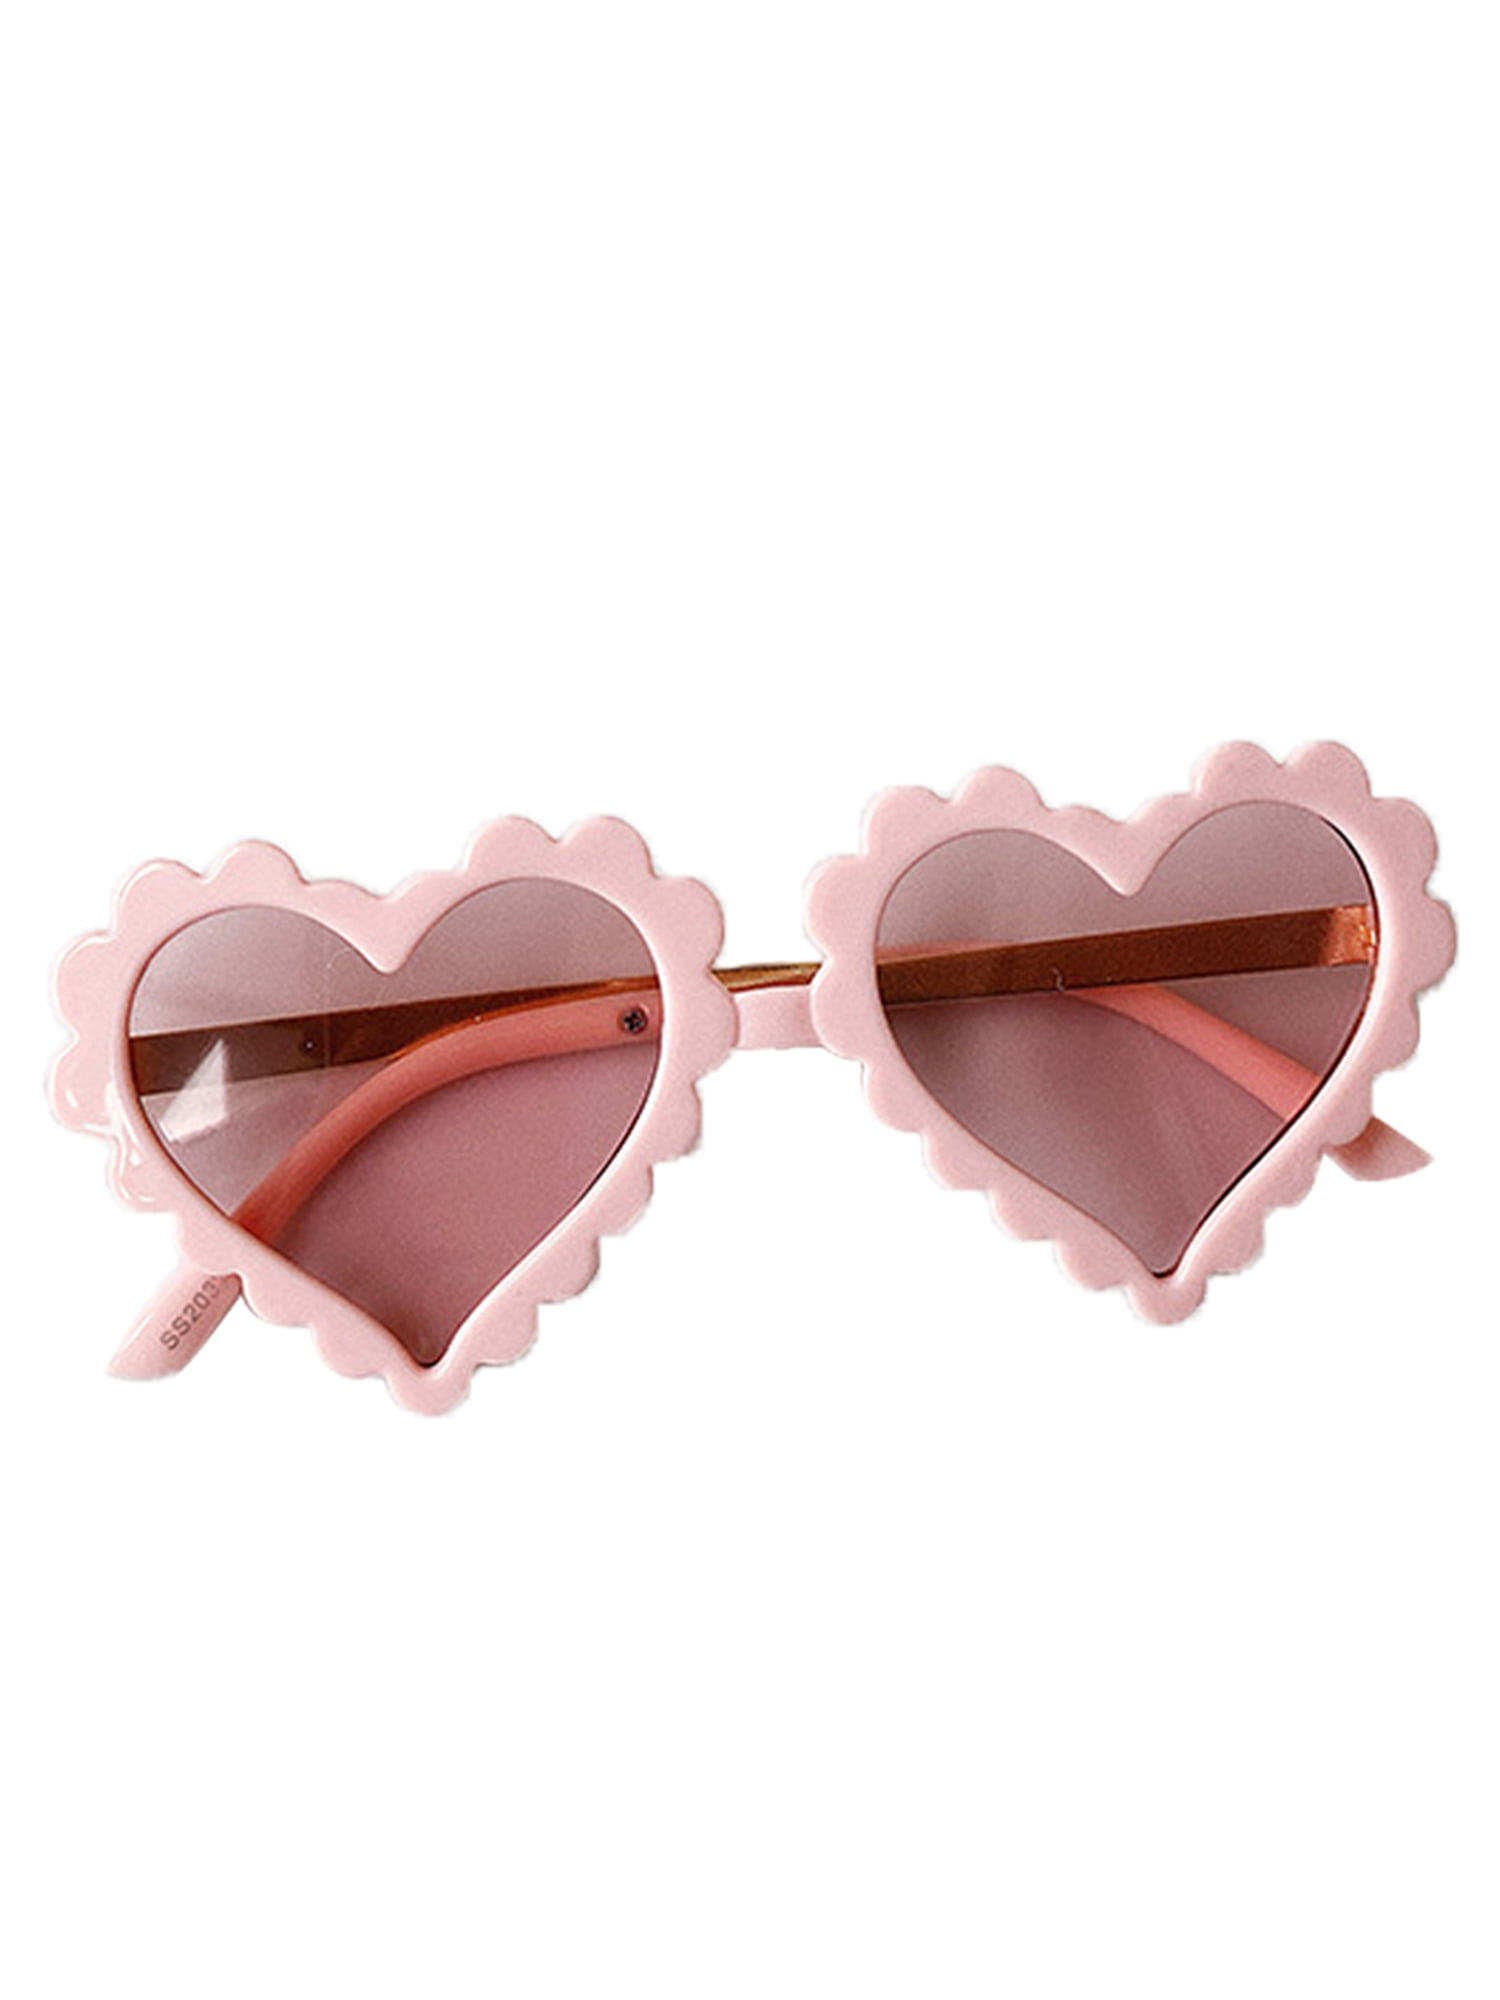 Valentine s Day Heart Shaped Sunglasses for Kids Toddler Girls Age 2-8 UV Protection Outdoor Beach Sunglasses 